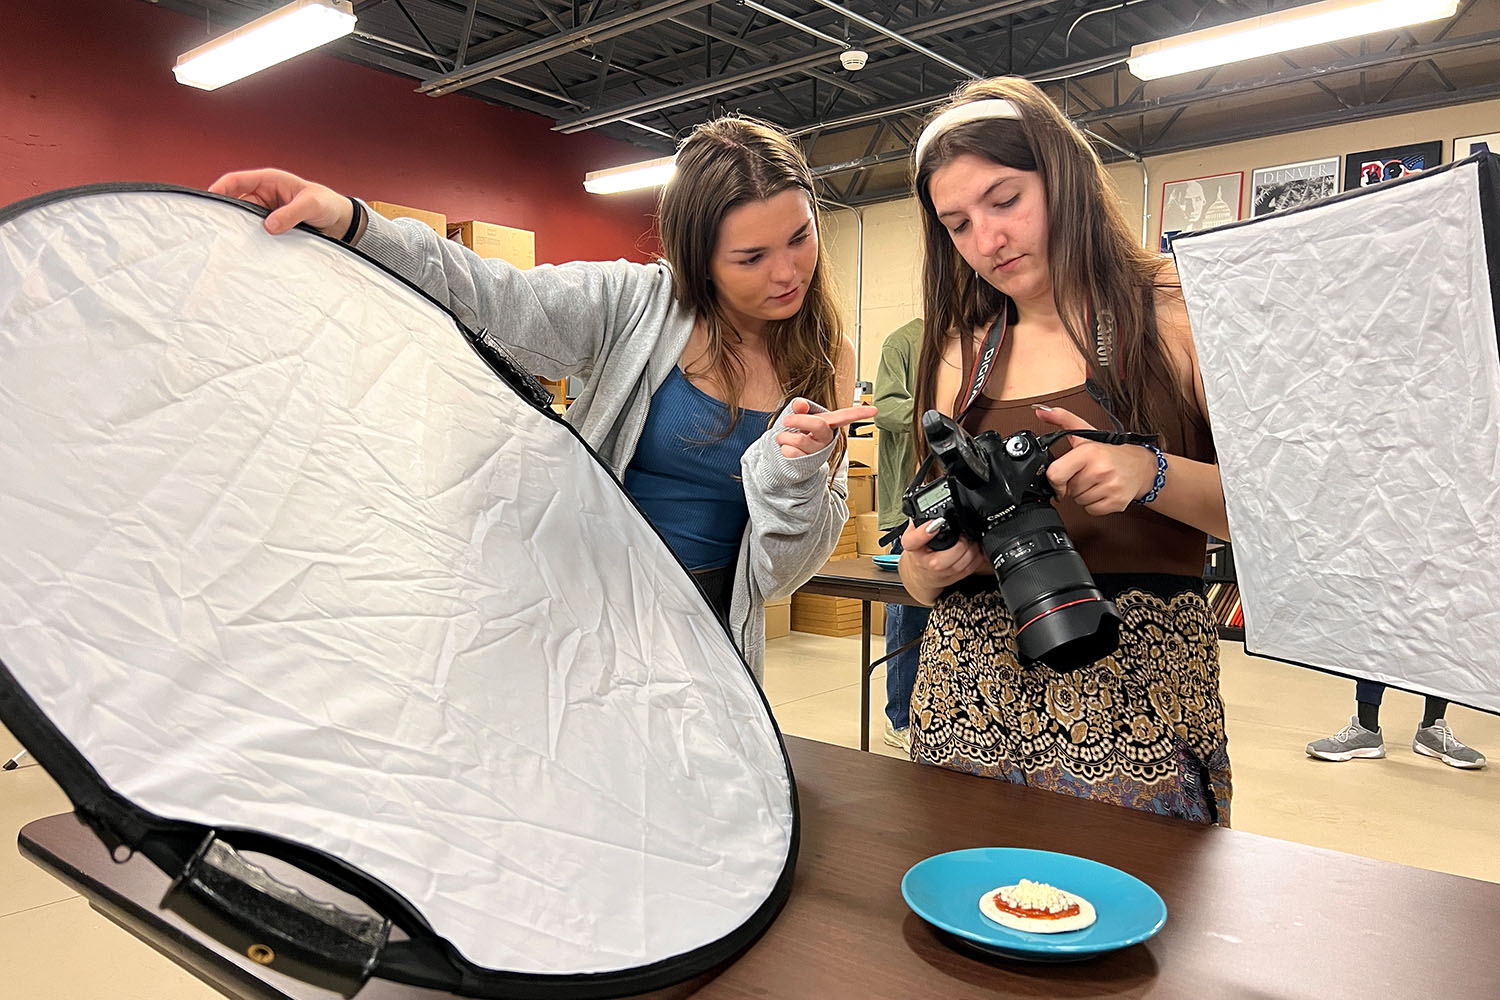 Before Cherry Creative photographers started visiting restaurants for the dining guide, I facilitated a lighting workshop for editors to teach skills to stage photographers.